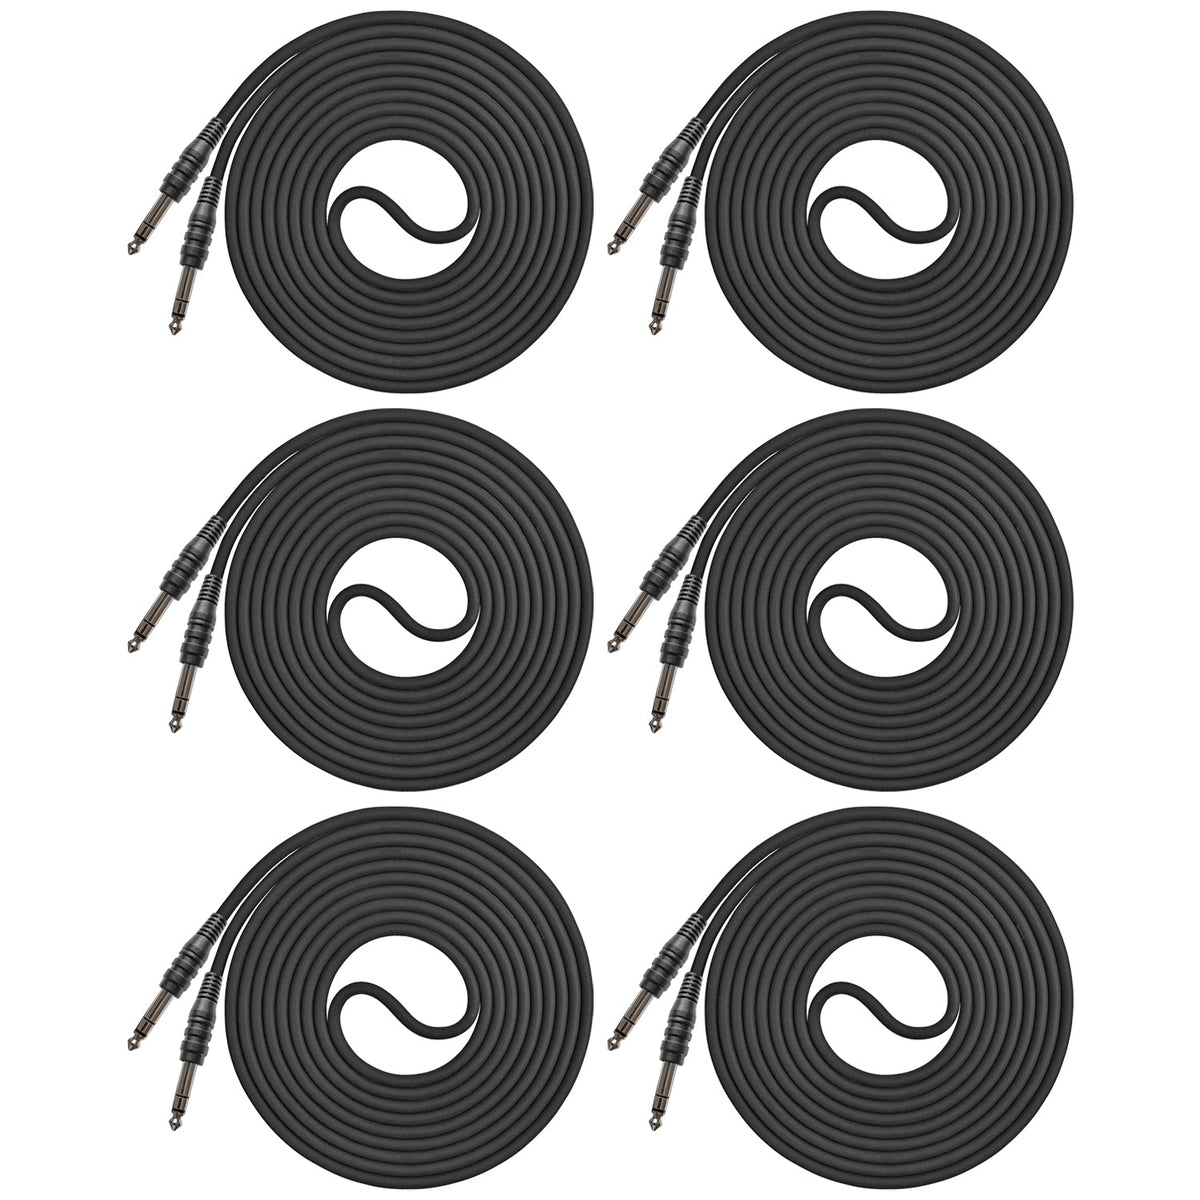 AxcessAbles 1/4 Inch TRS Instrument Cable 10ft - 6 Pack | 6.35mm Male Jack Stereo Audio Cord | 10ft TRS to TRS Balanced Patch Cables (6-Pack)